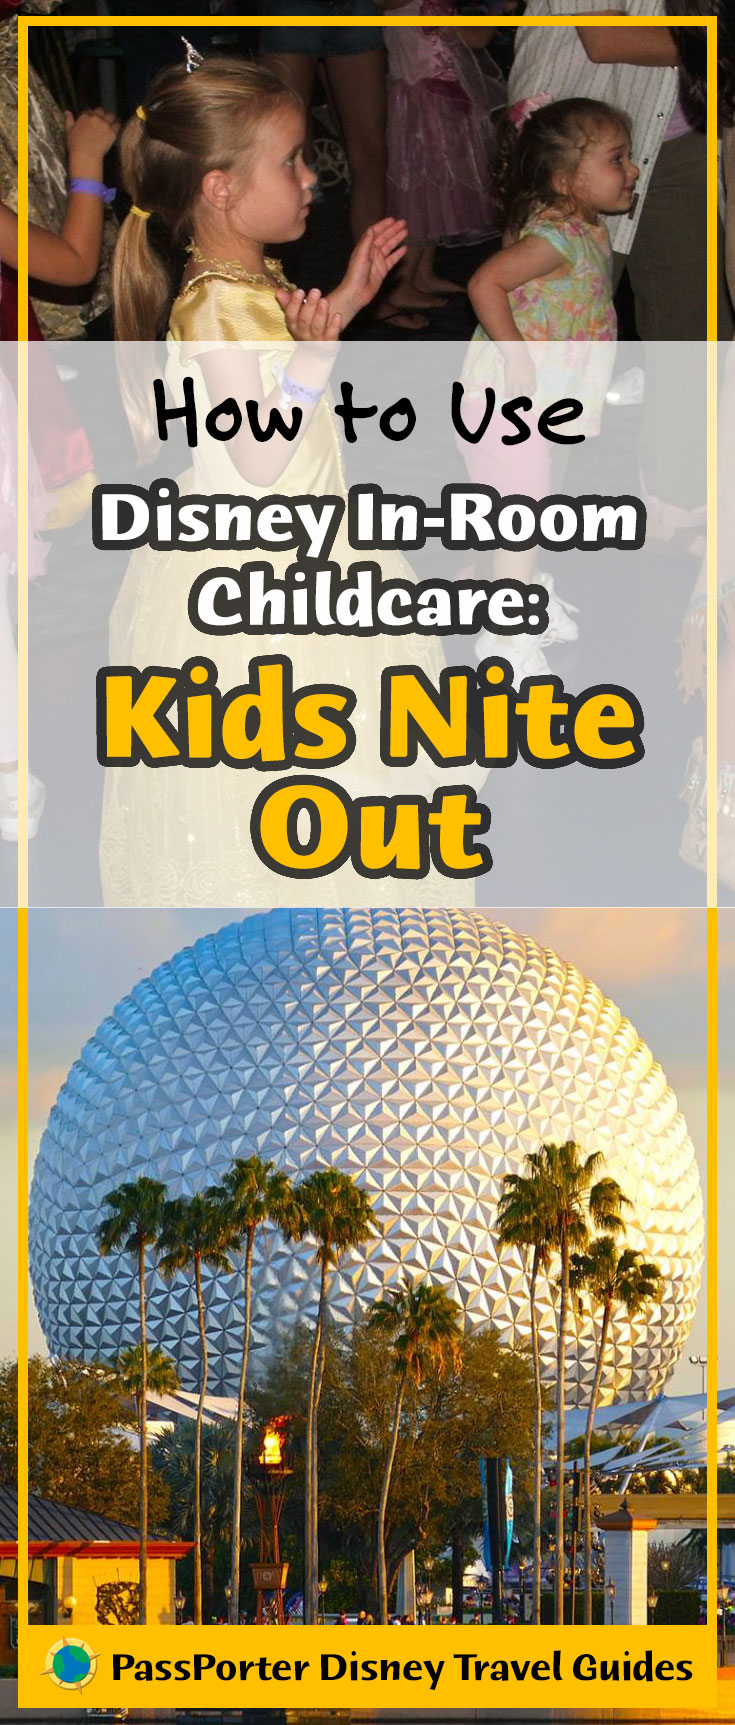 Enjoy a grown-up night out with Kid's Nite Out in-room child care | Walt Disney World | PassPorter.com